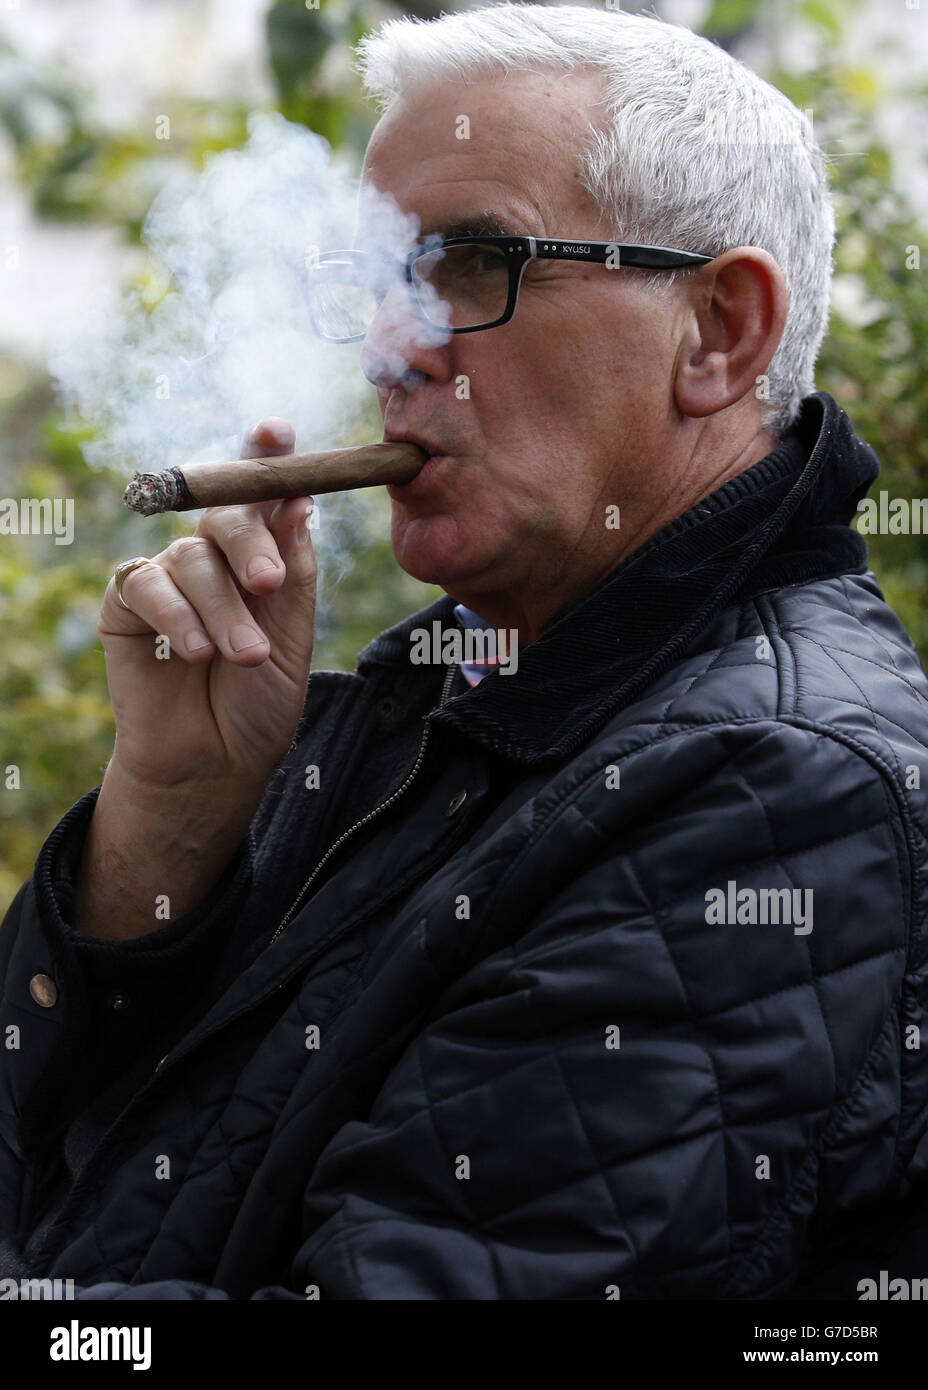 A man smokes a cigar in St. James' Park, London following the publication of the London Health Commission Report with a recommendation from a health panel that would make thousands of acres of parkland in London and landmarks including Trafalgar Square smoke-free zones. Stock Photo